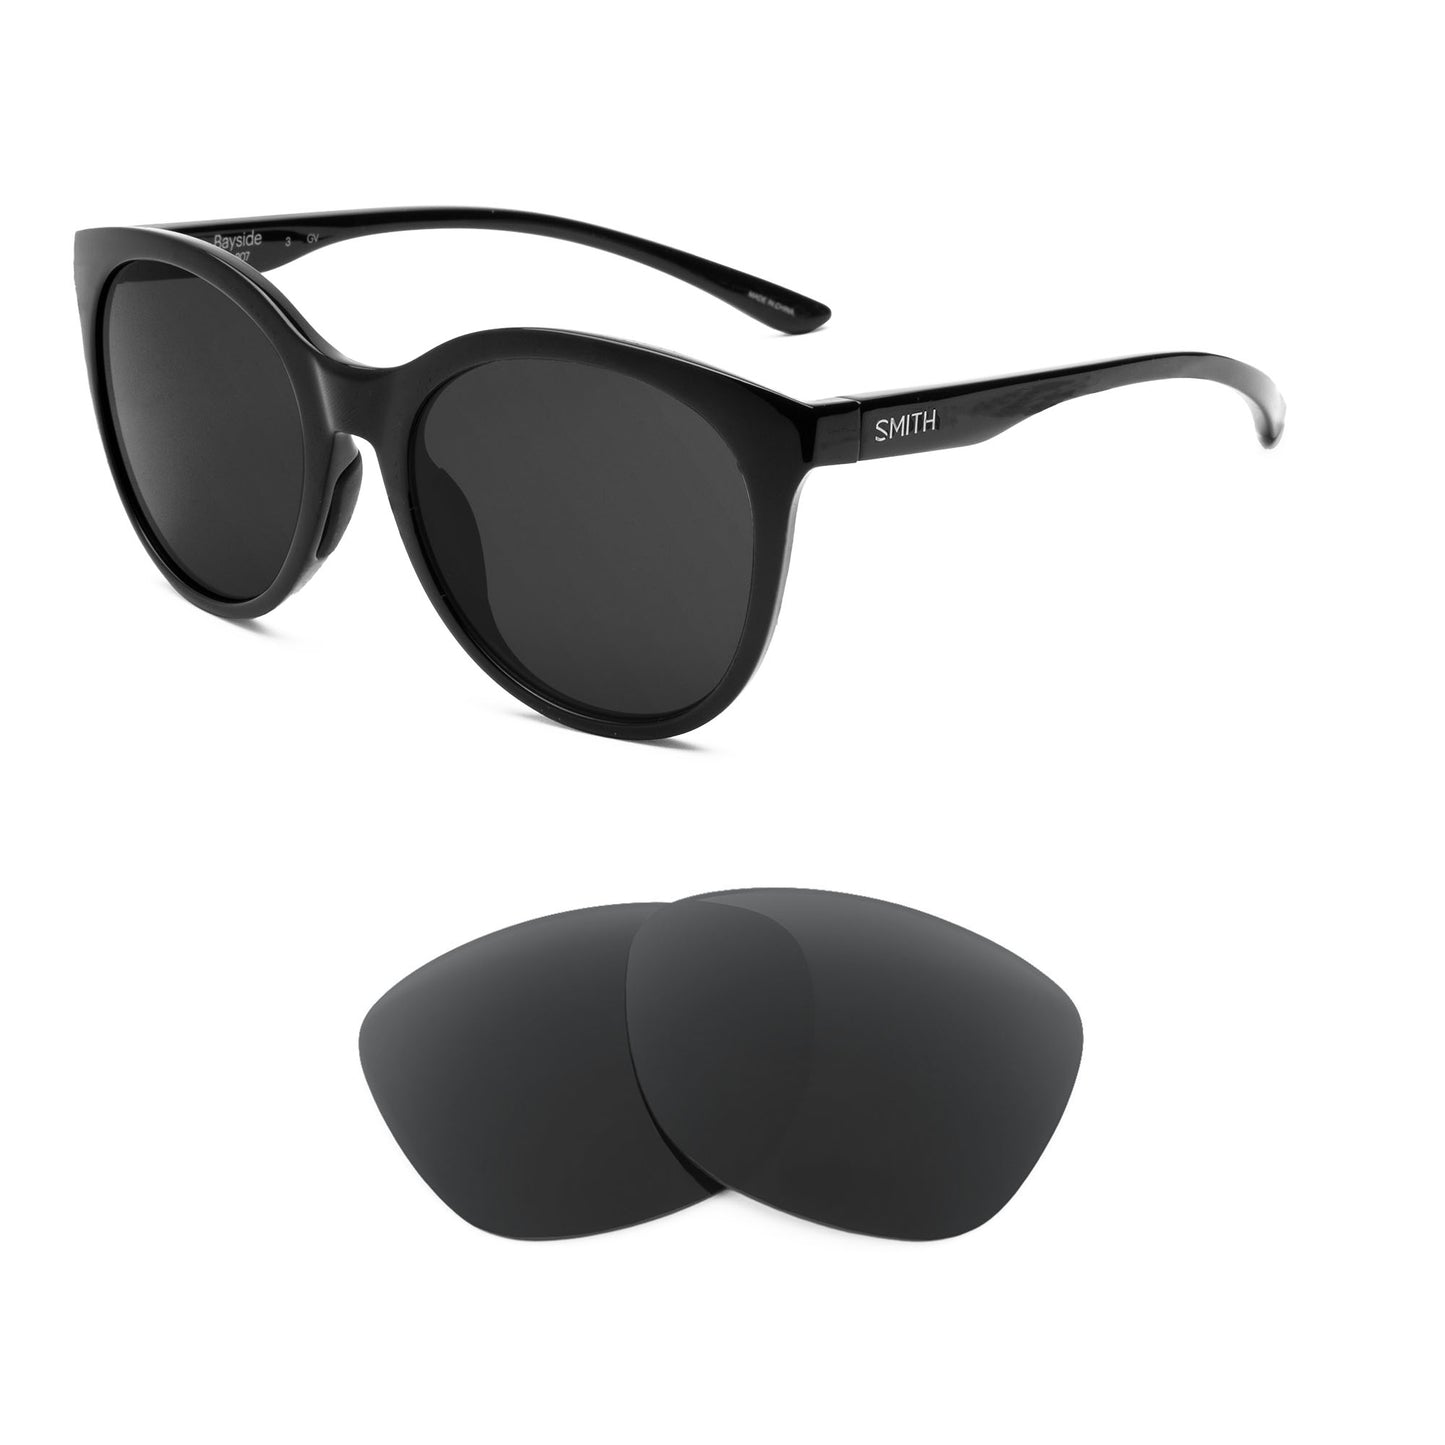 Smith Bayside sunglasses with replacement lenses